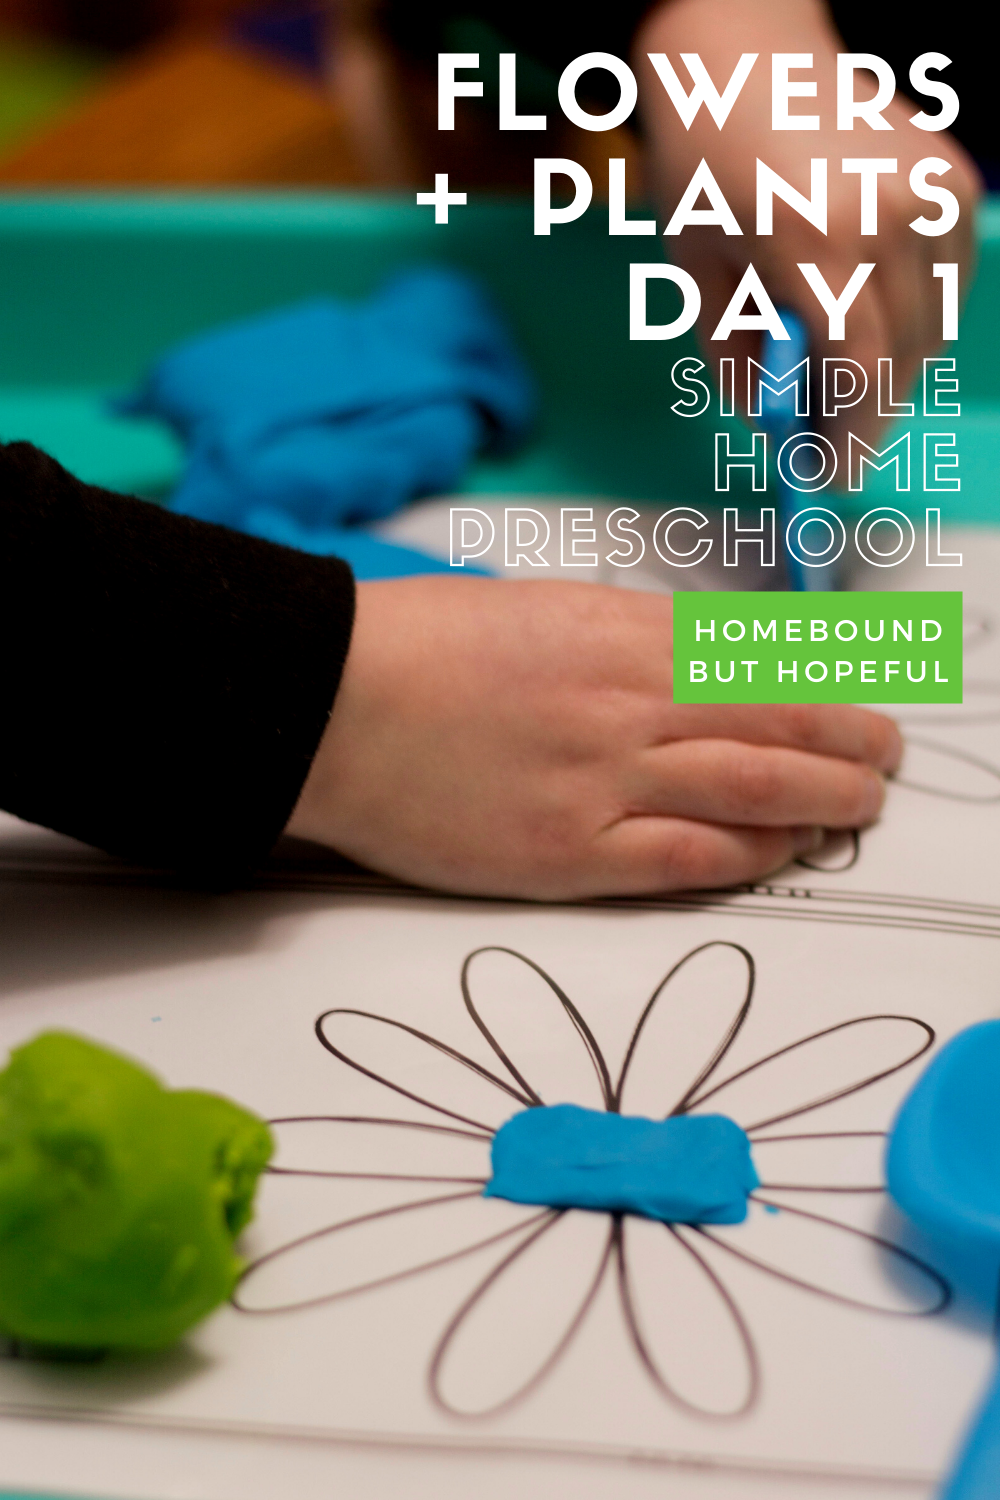 With spring and summer around us, it's time to start learning about flowers, plants, and seeds at our home preschool. Check out all of our Day 1 fun! #preschooler #preschool #preschoolactivities #preschoolideas #homeschool #stayhomesavelives #stayhomestaysafe